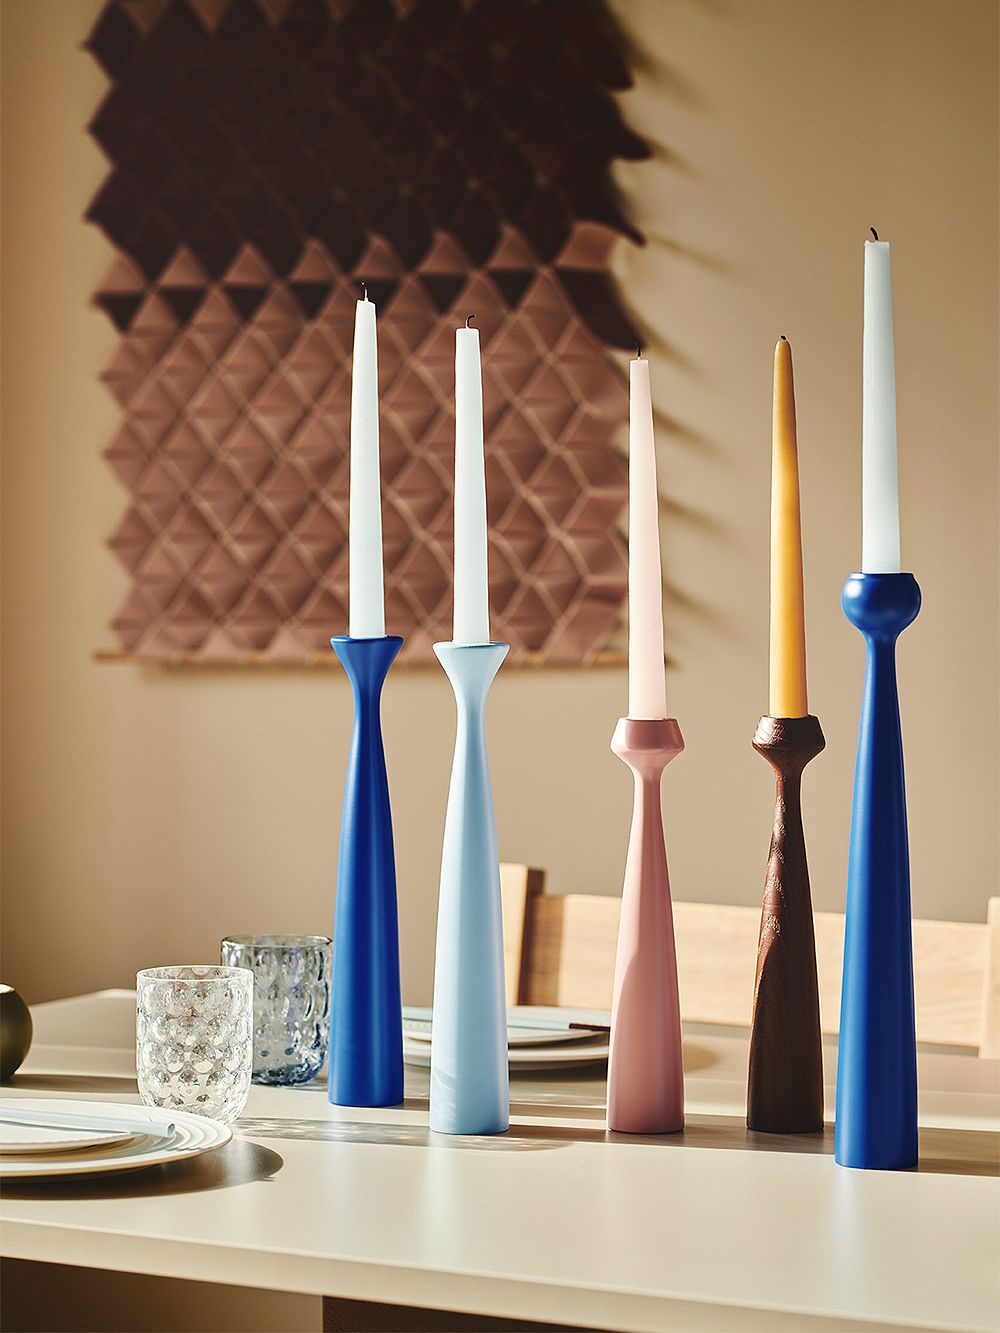 An image featuring applicant's wooden Blossom candleholders and candles in many bright hues, placed on the table, as part of the dining room decor.